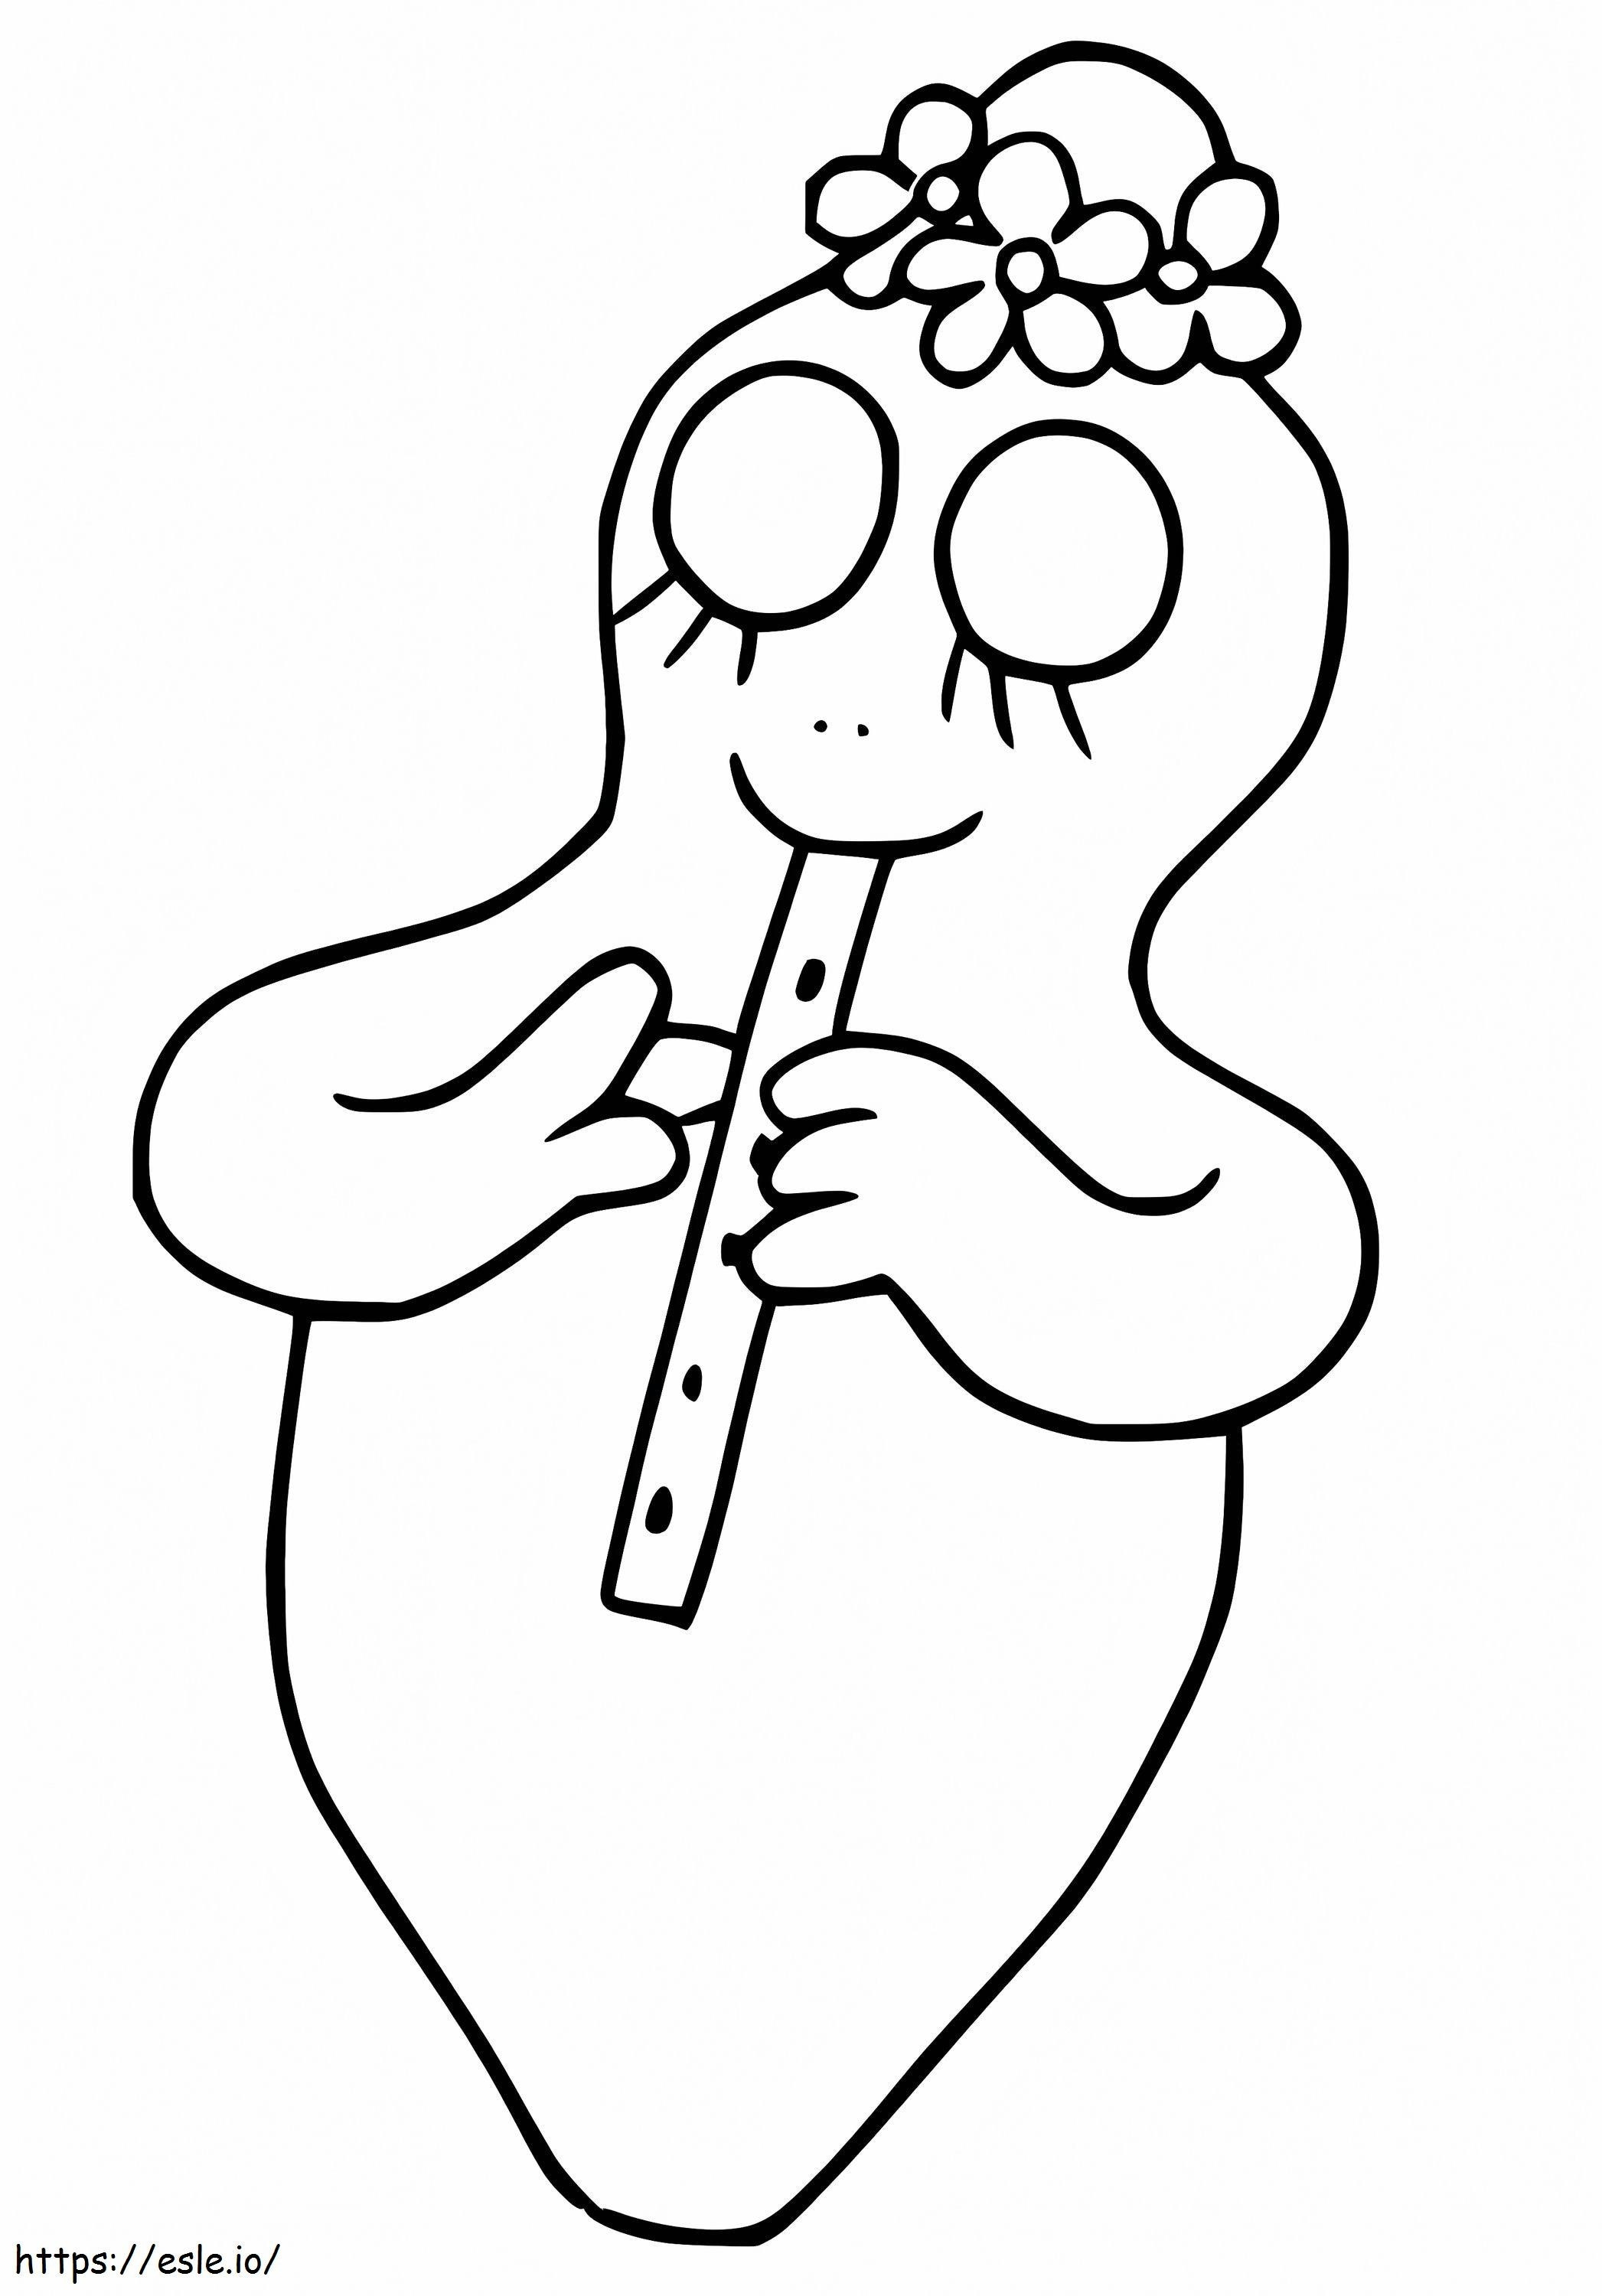 Barbalala Playing Flute coloring page